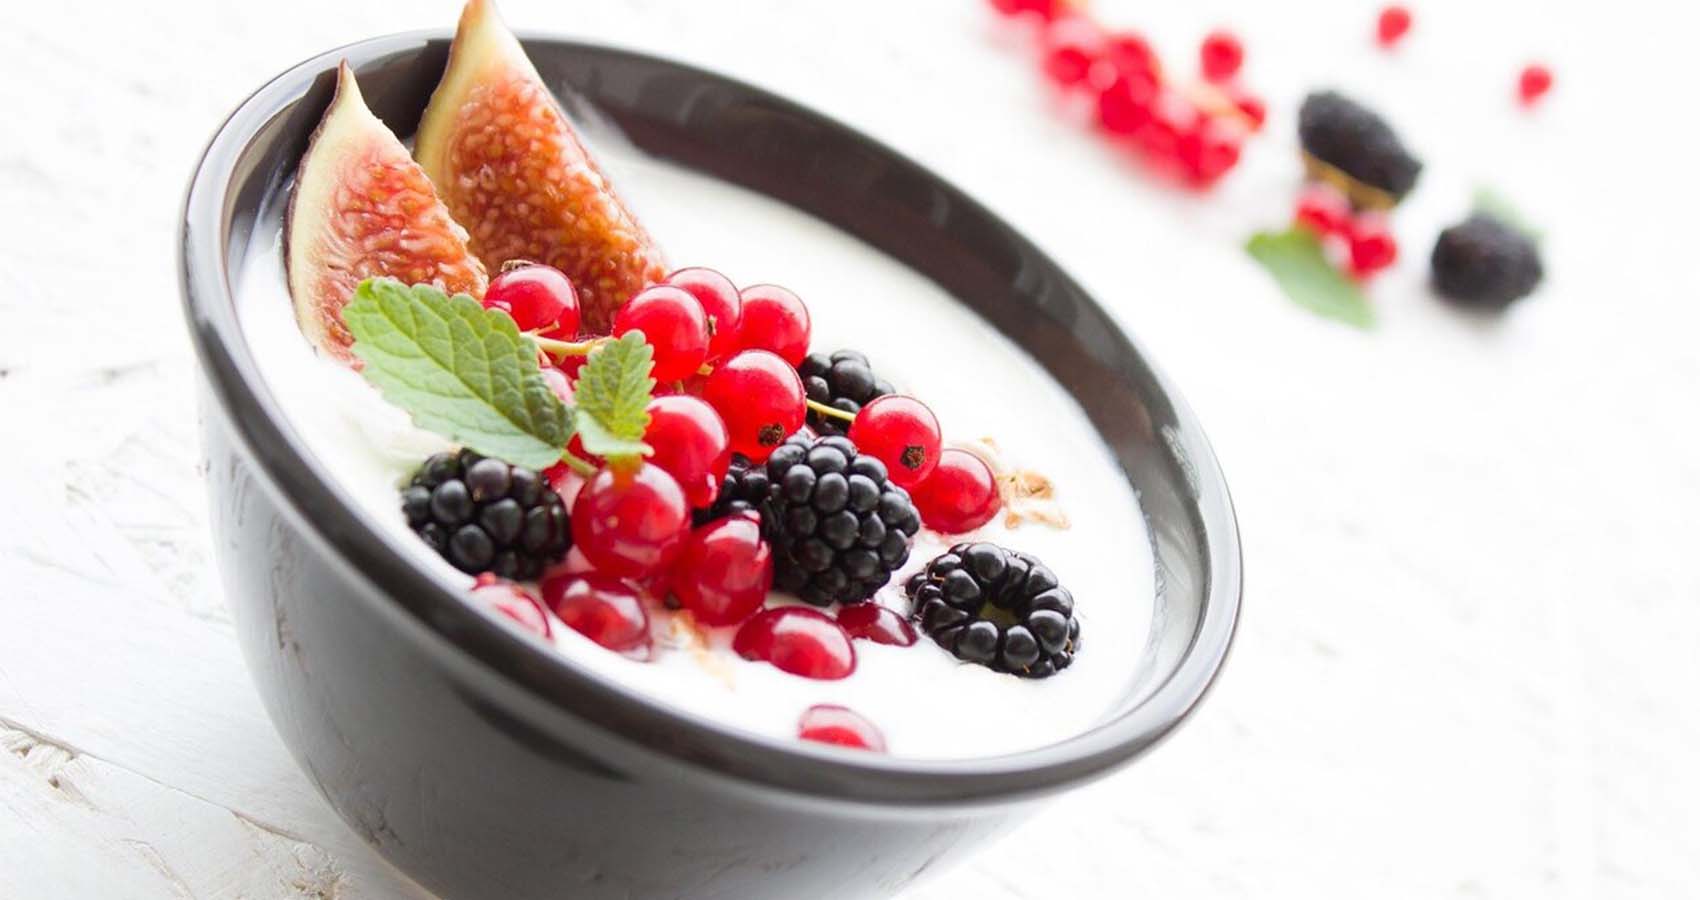 Daily Dose Of Yoghurt Could Be The Go-To Food To Manage High Blood Pressure